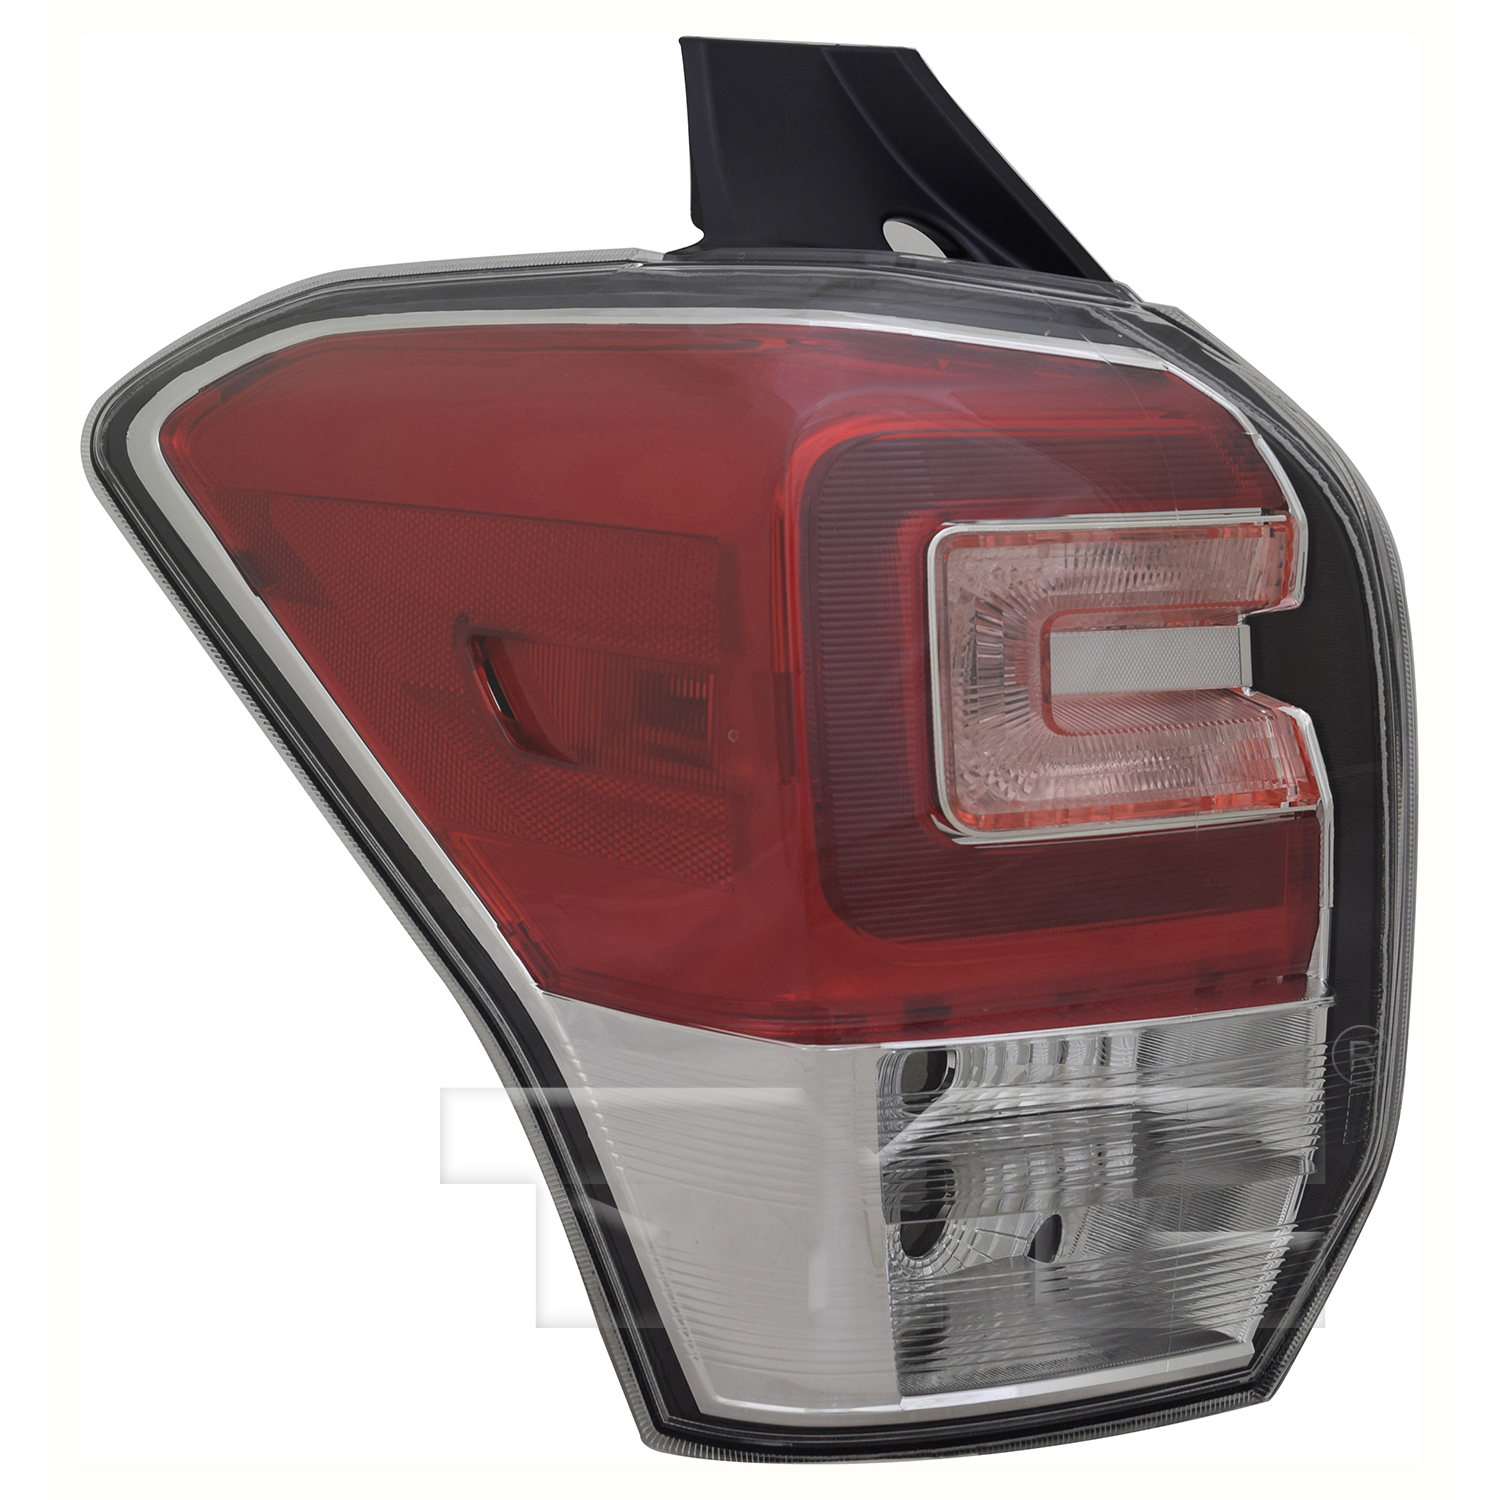 Aftermarket TAILLIGHTS for SUBARU - FORESTER, FORESTER,17-18,LT Taillamp lens/housing